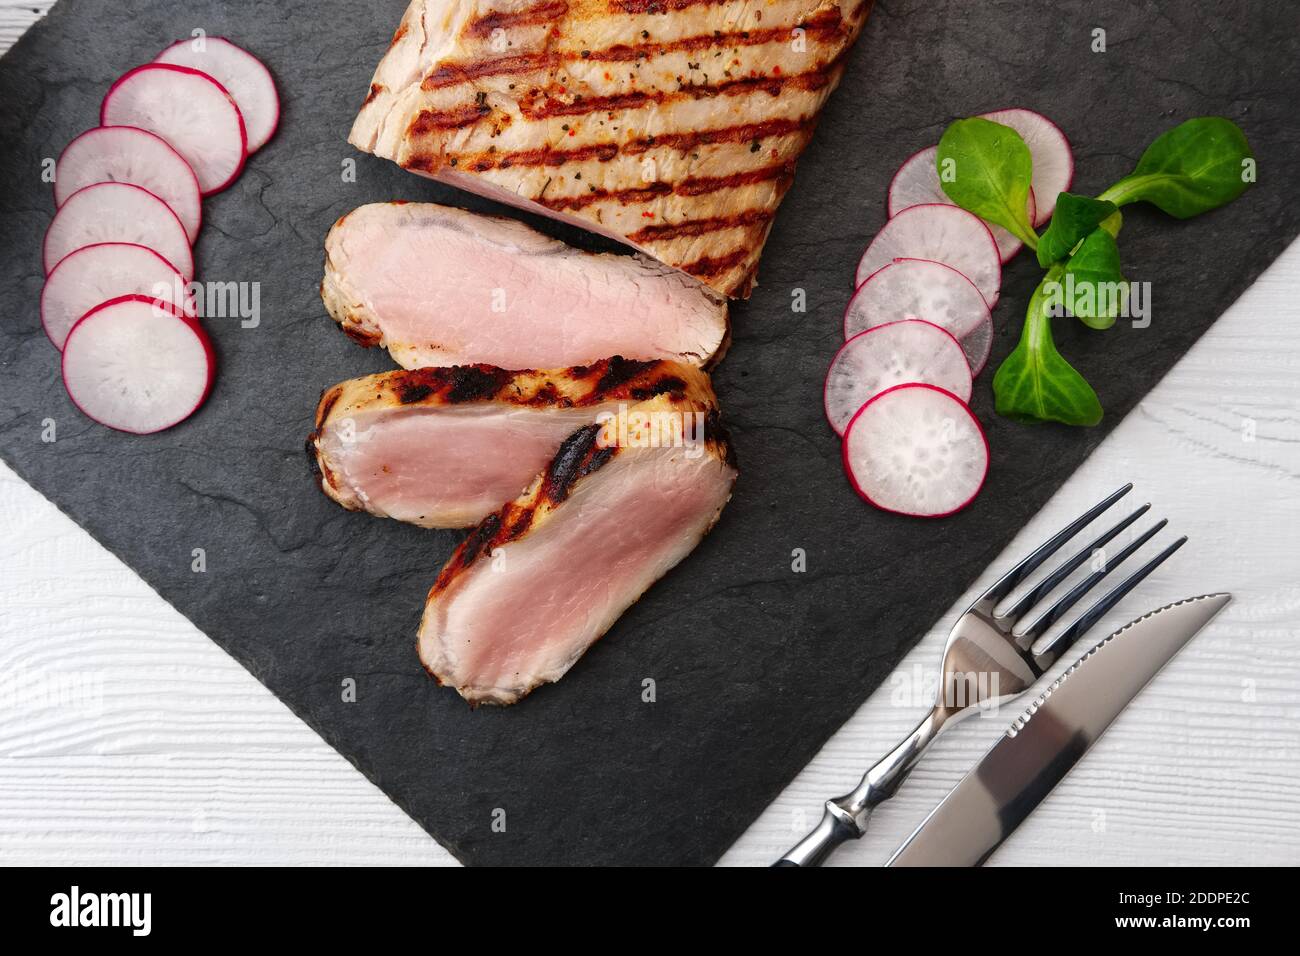 Sliced grilled pork fillet with fresh tomatoes and raddish served with glass of red wine. Stock Photo